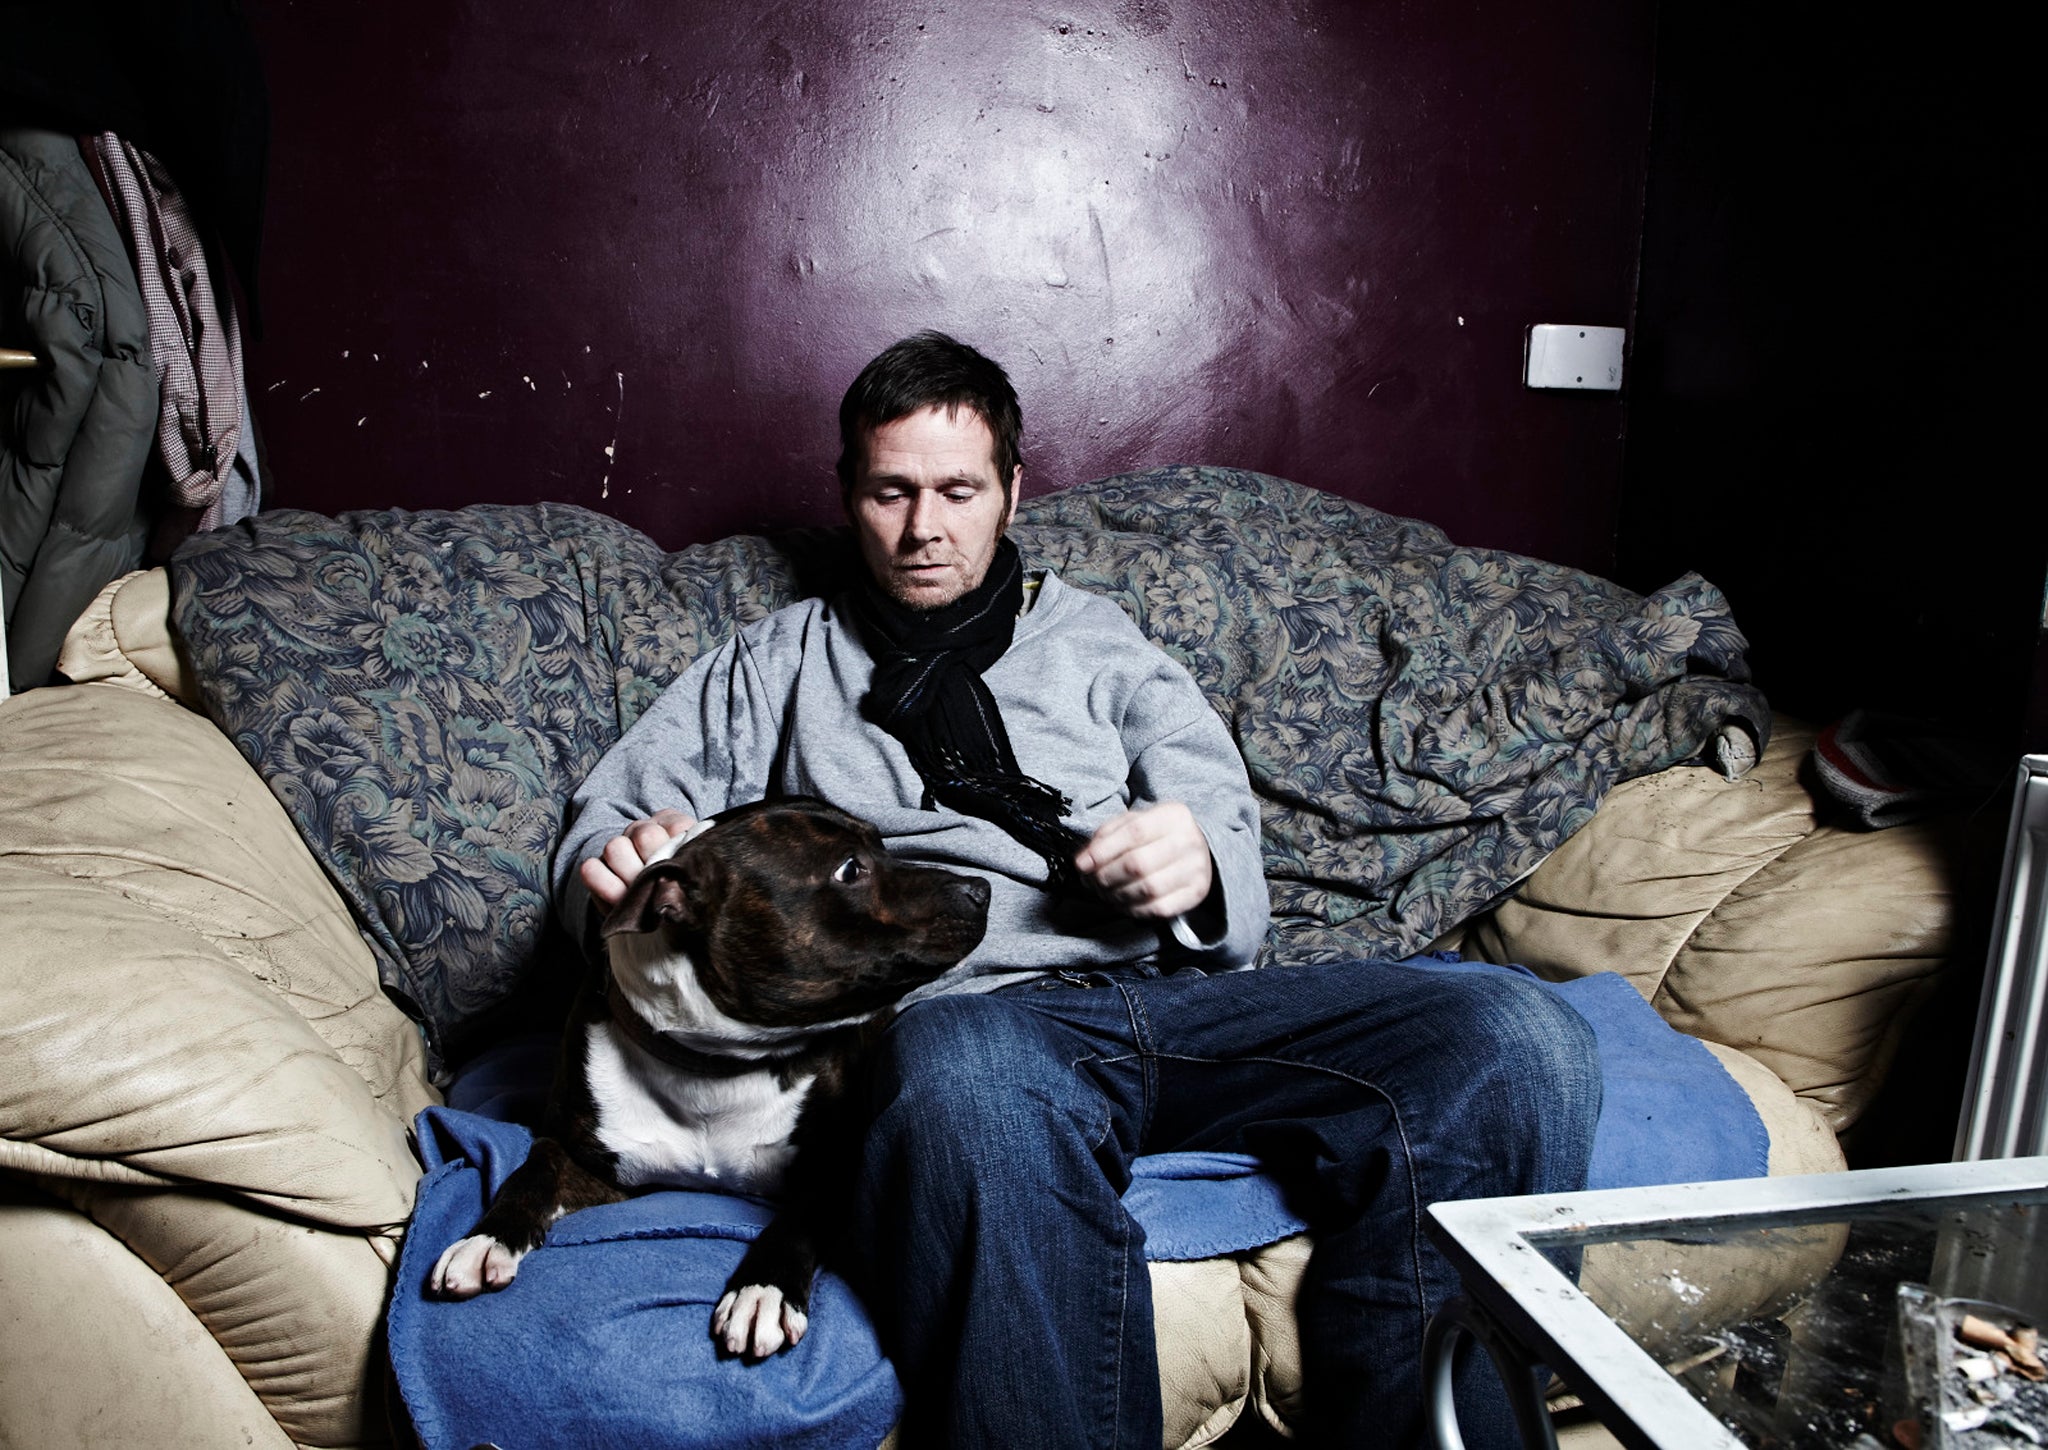 Two other 'stars' of Benefits Street, self-confessed alcoholic Fungi and his dog